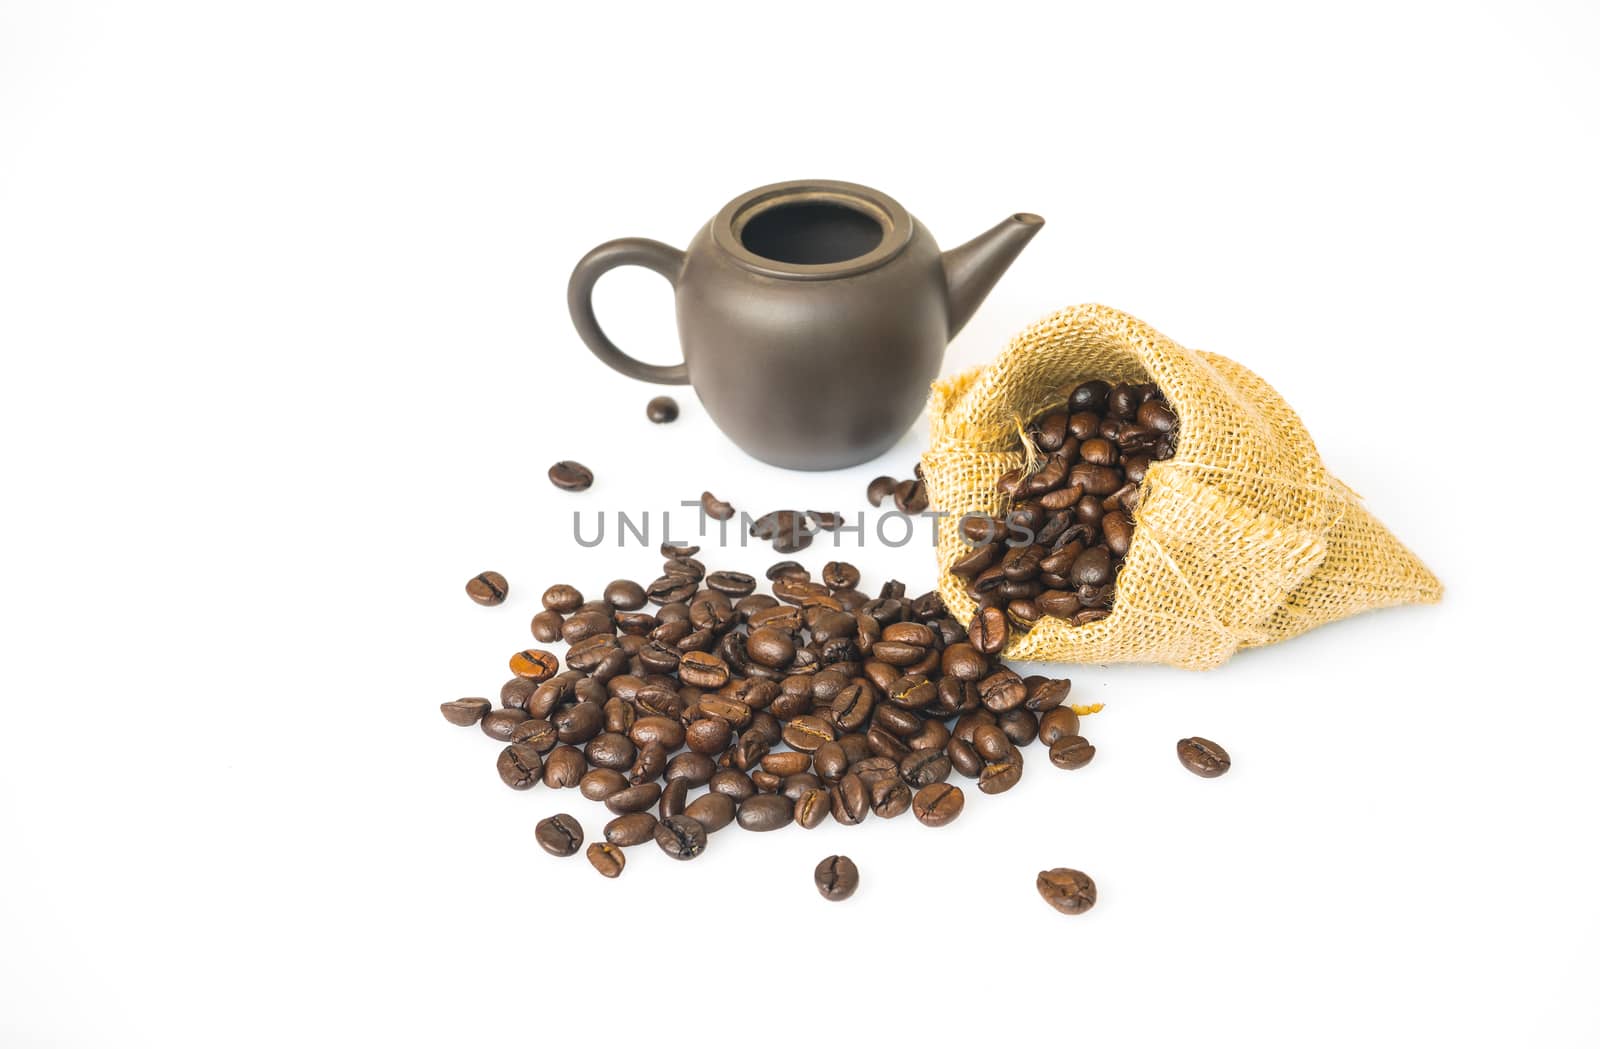 Coffee beans on a sack with Ancient pots on a white background.